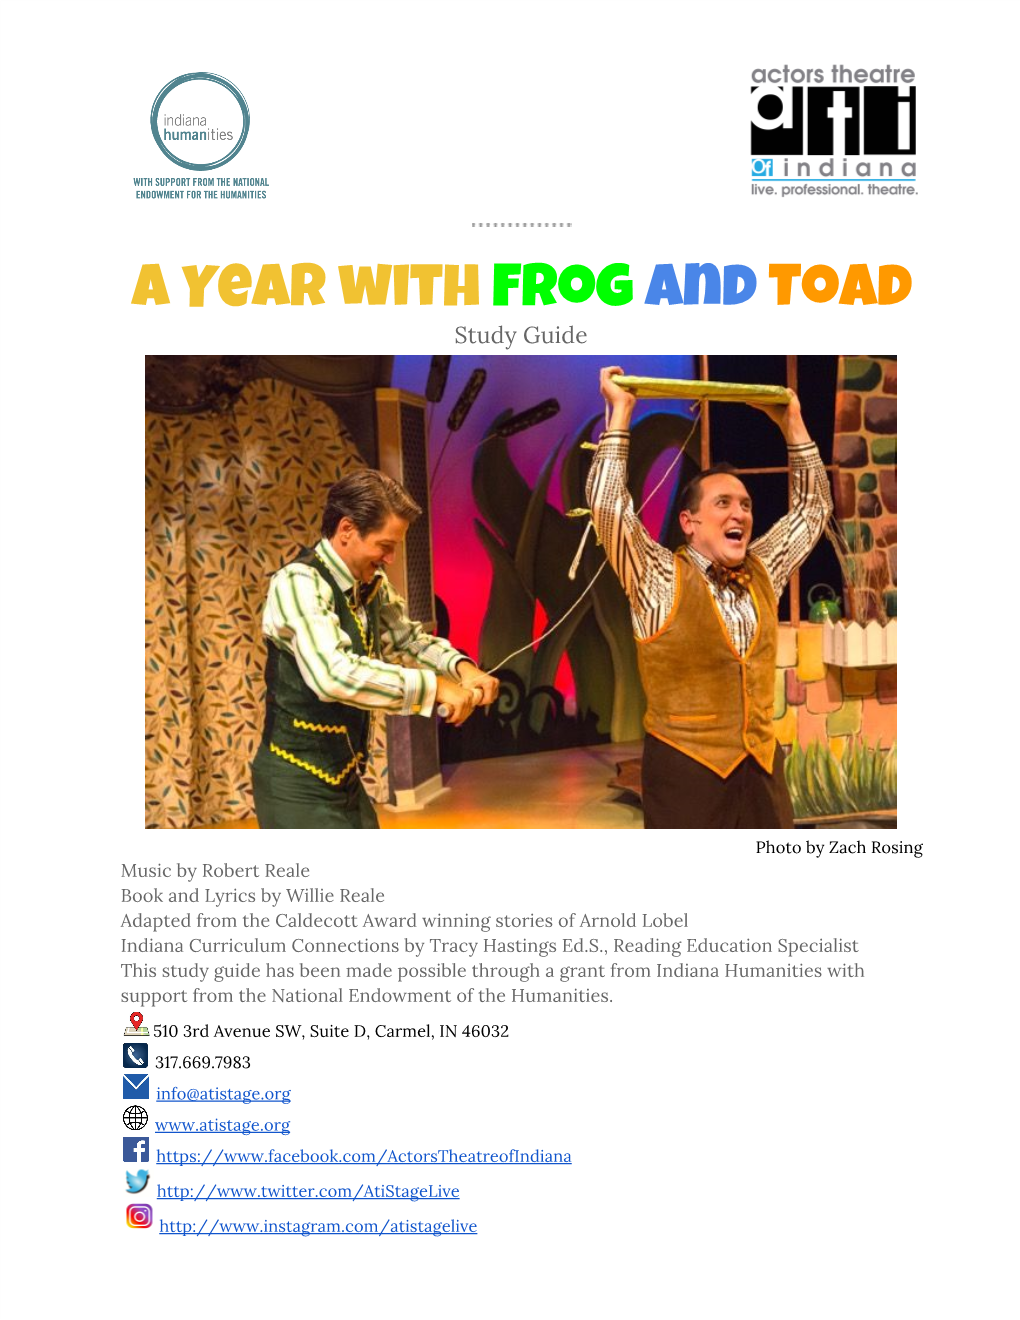 A Year With​ ​Frog ​And ​Toad